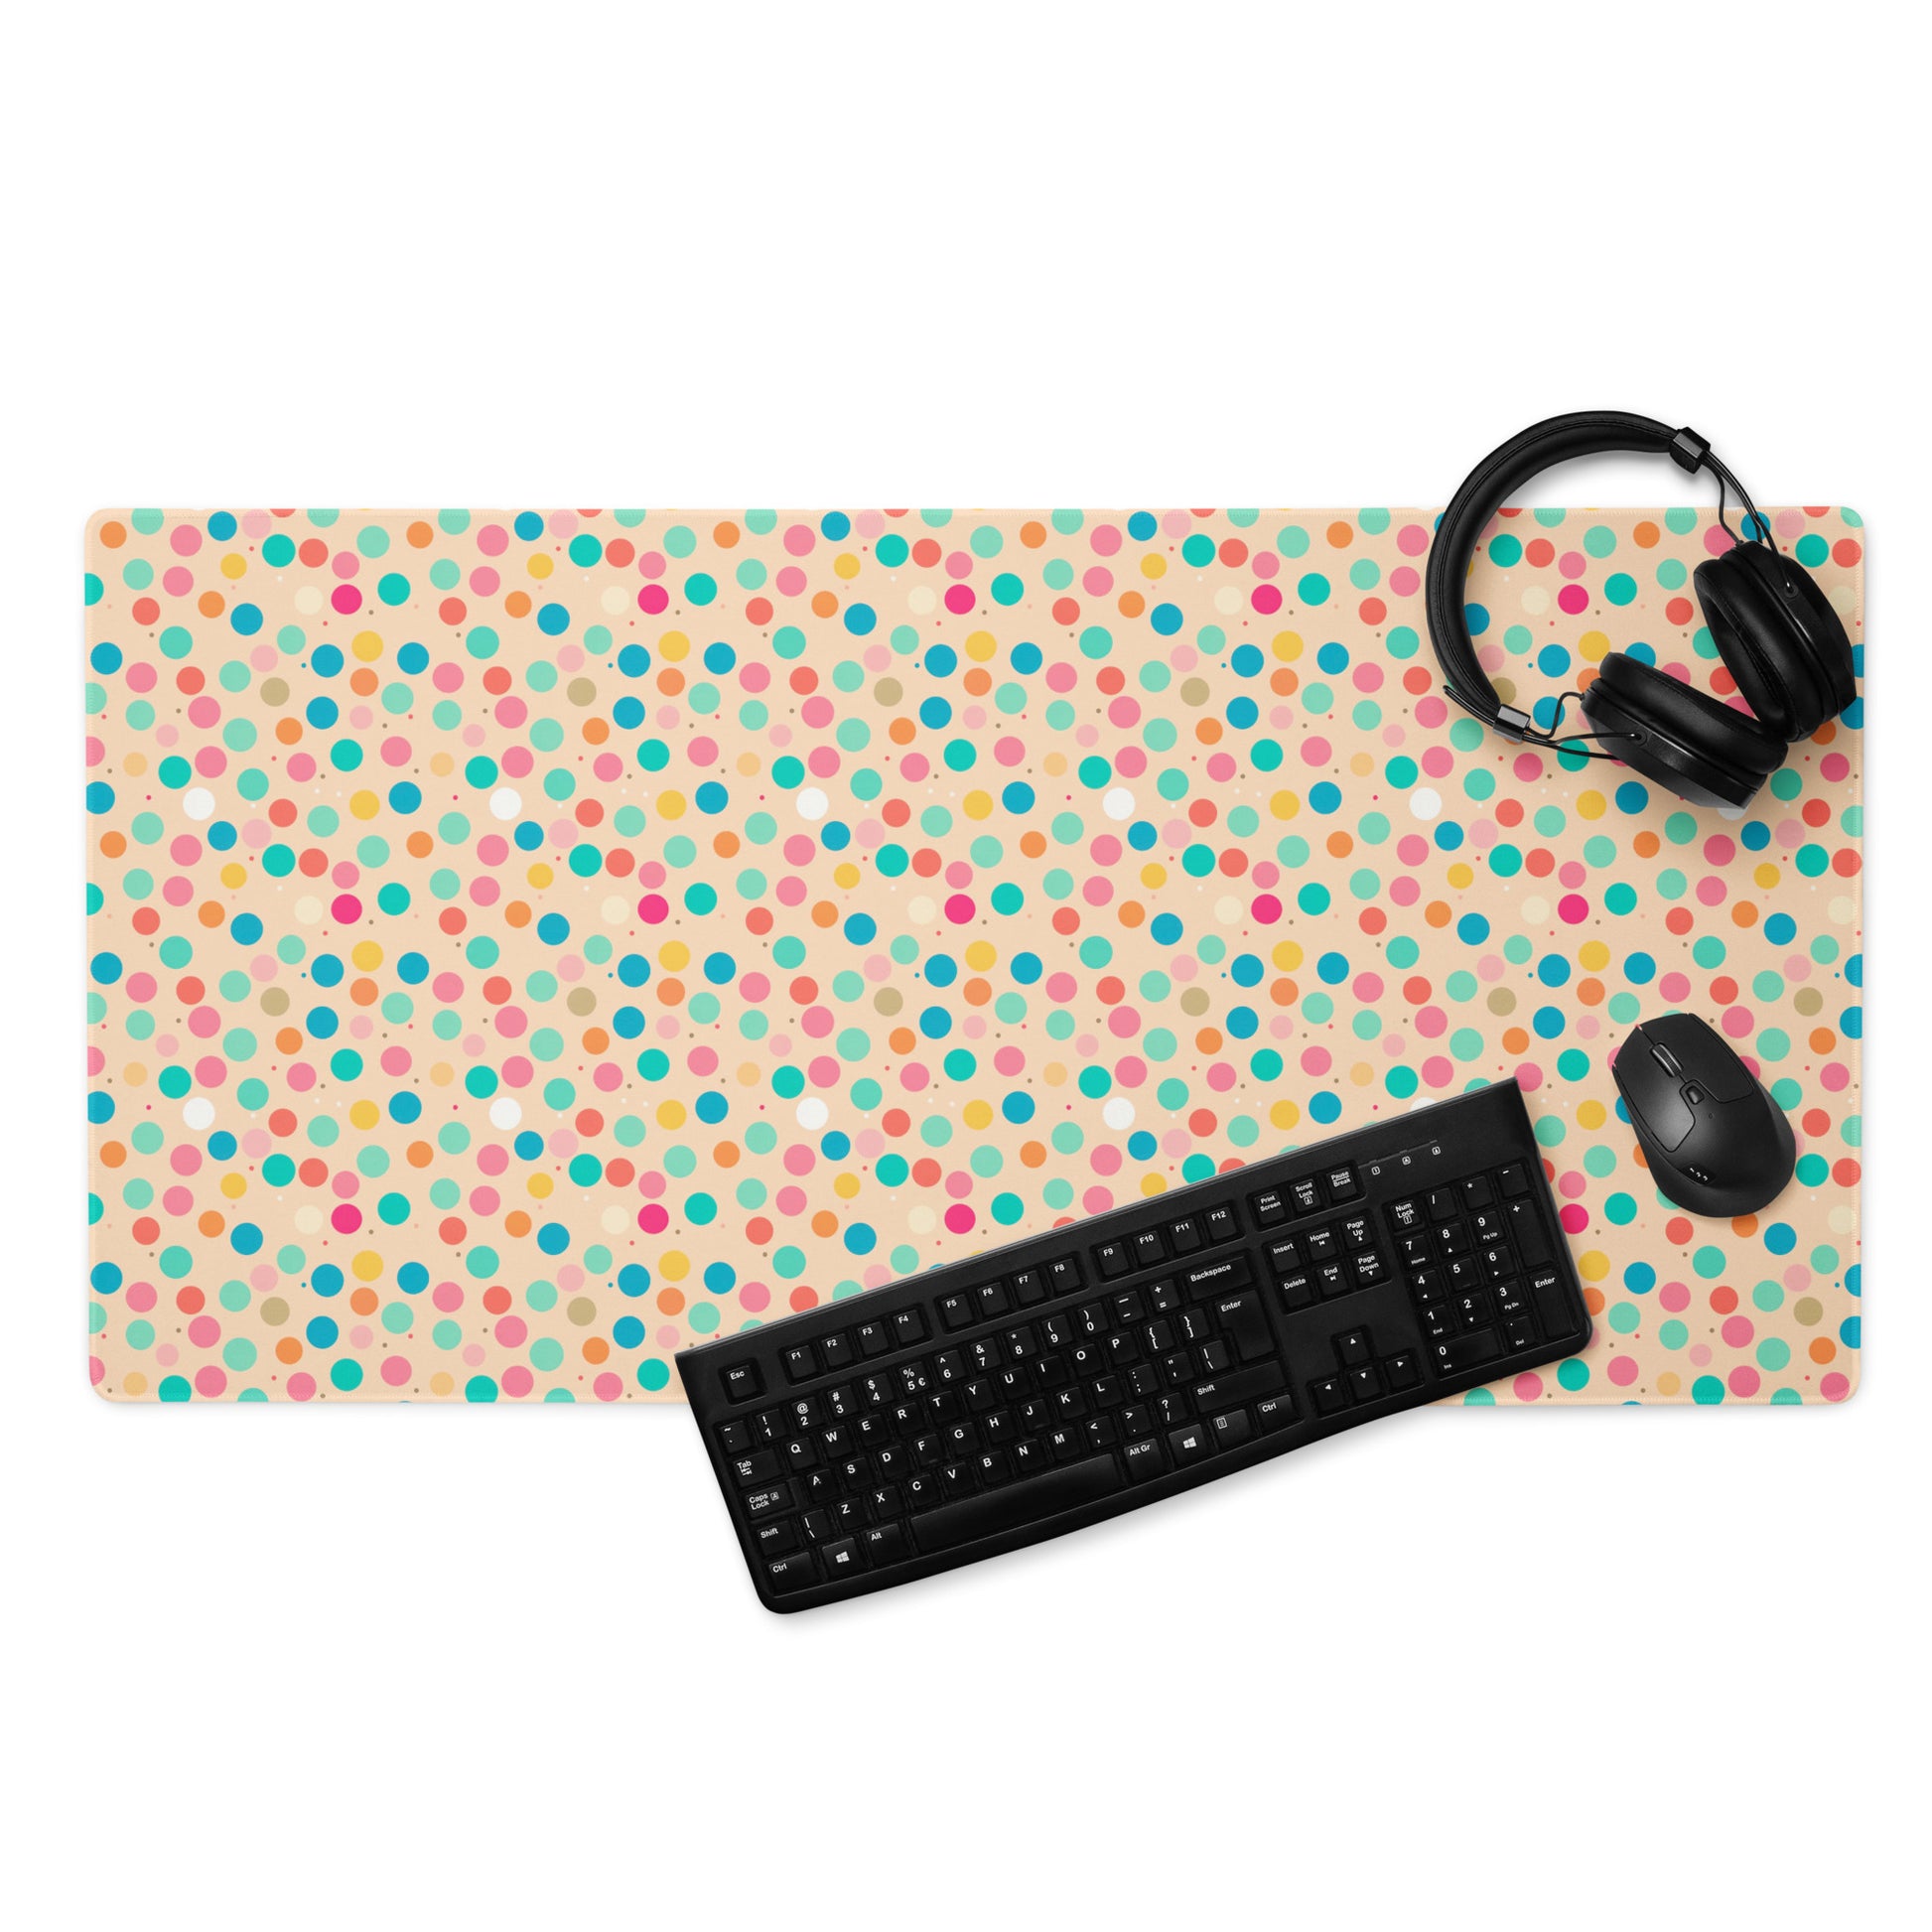 A 36" x 18" desk pad with a colorful polka dot pattern. With a keyboard, mouse, and headphones sitting on it.